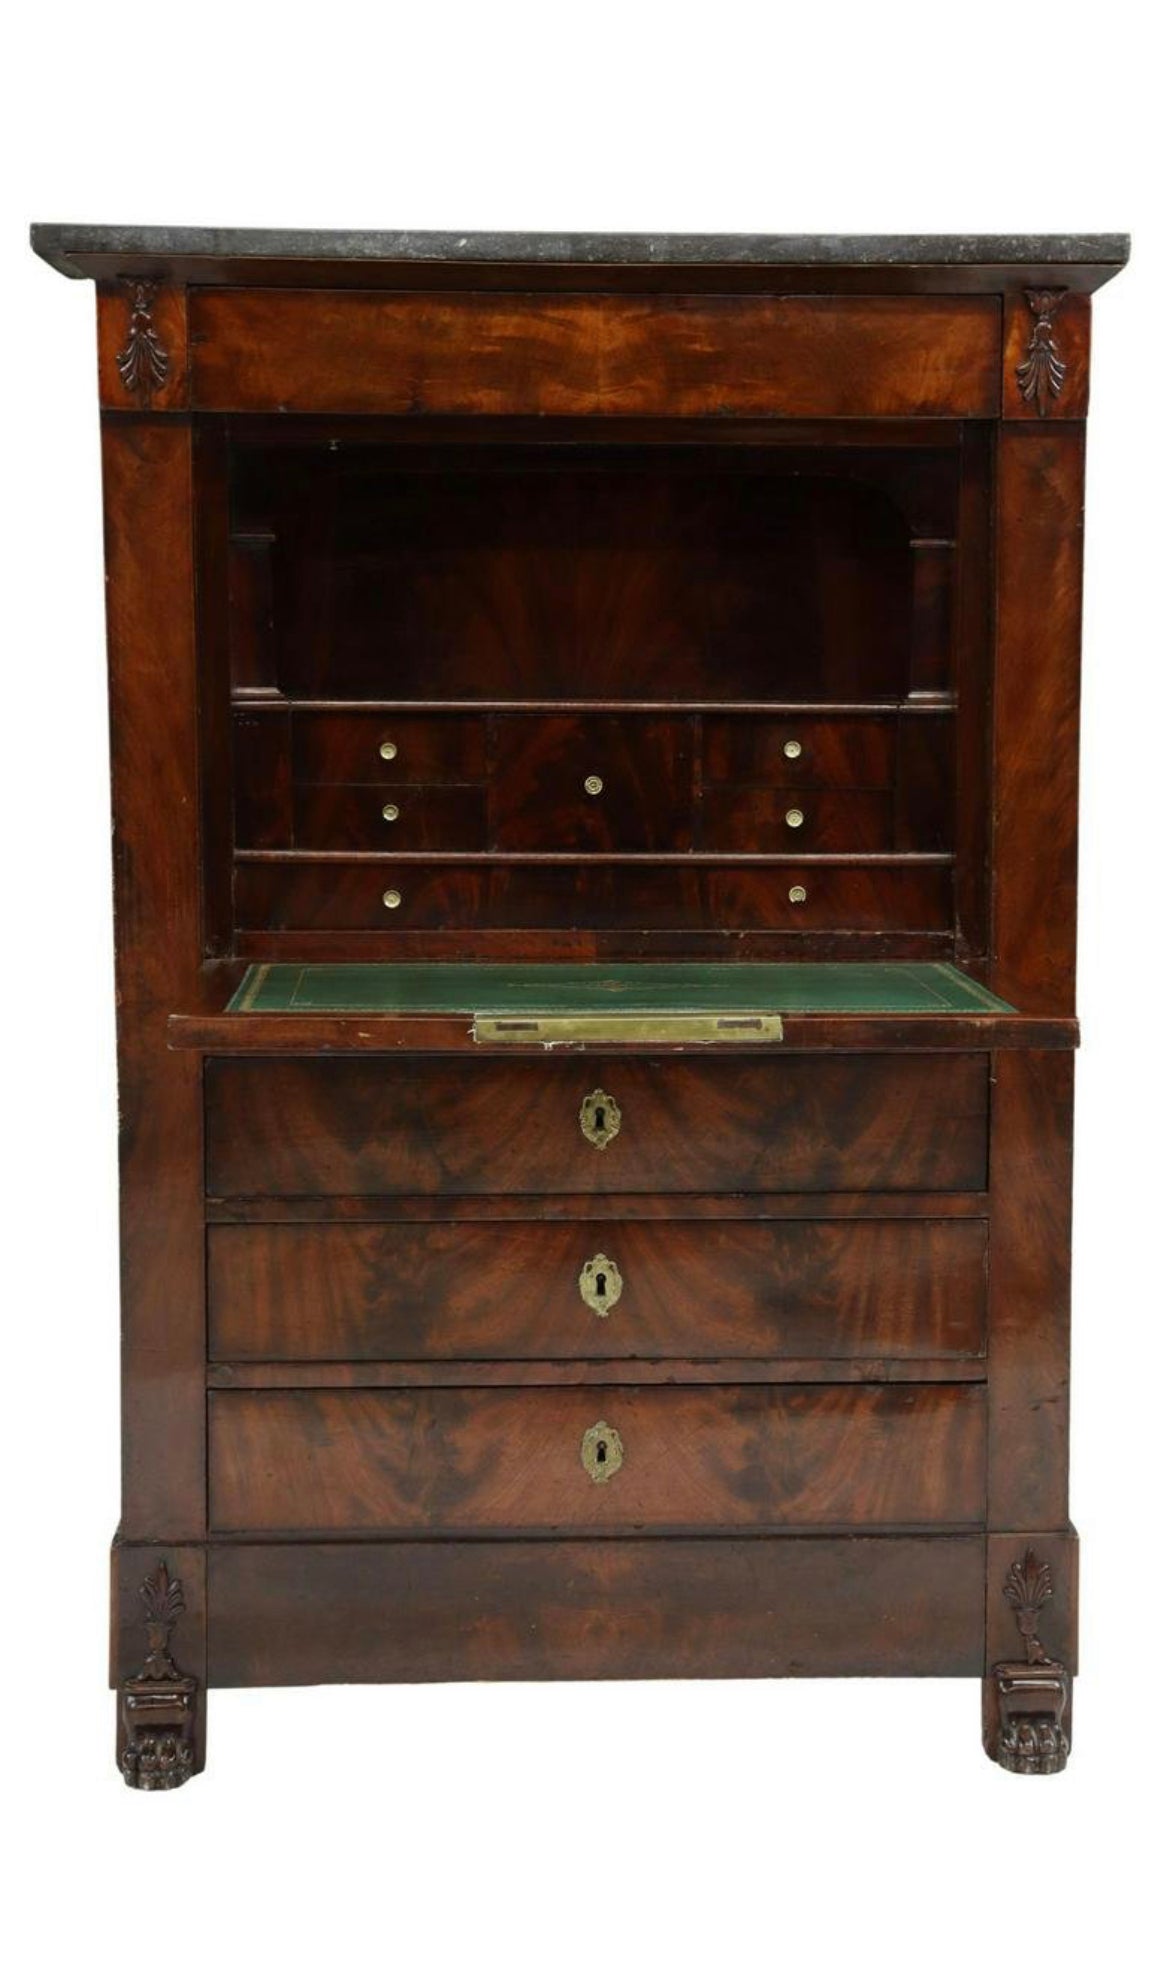 FRENCH EMPIRE 1850s FLAME MAHOGANY SECRETAIRE A ABATTANT